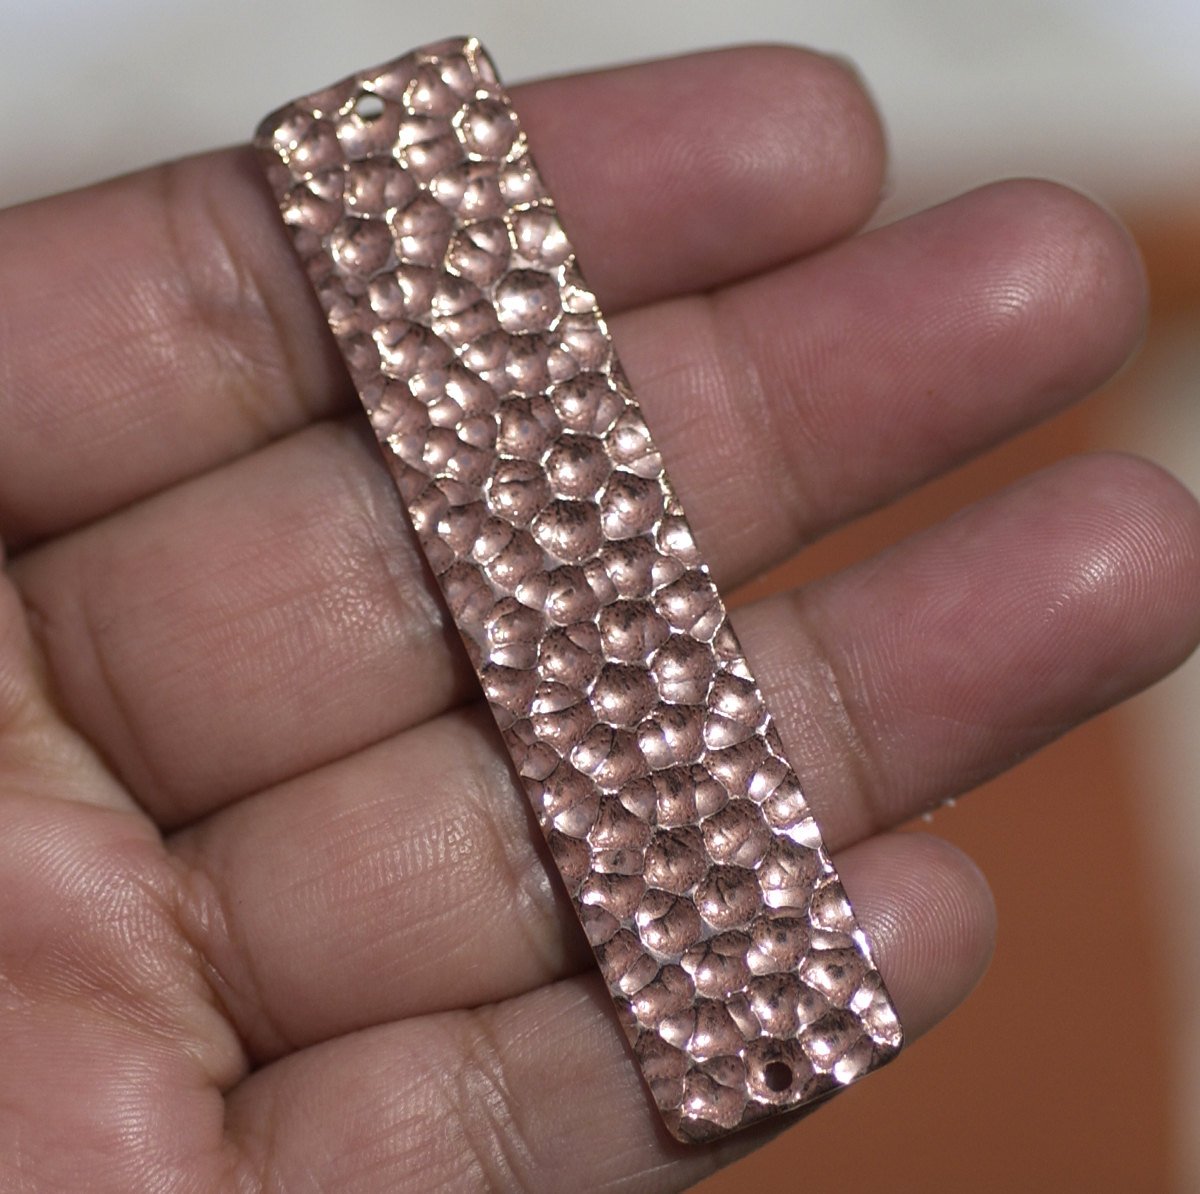 Hammered Bracelet 63mm x 14mm Blank Cutout with holes for Enameling Stamping Blanks Variety of Metals